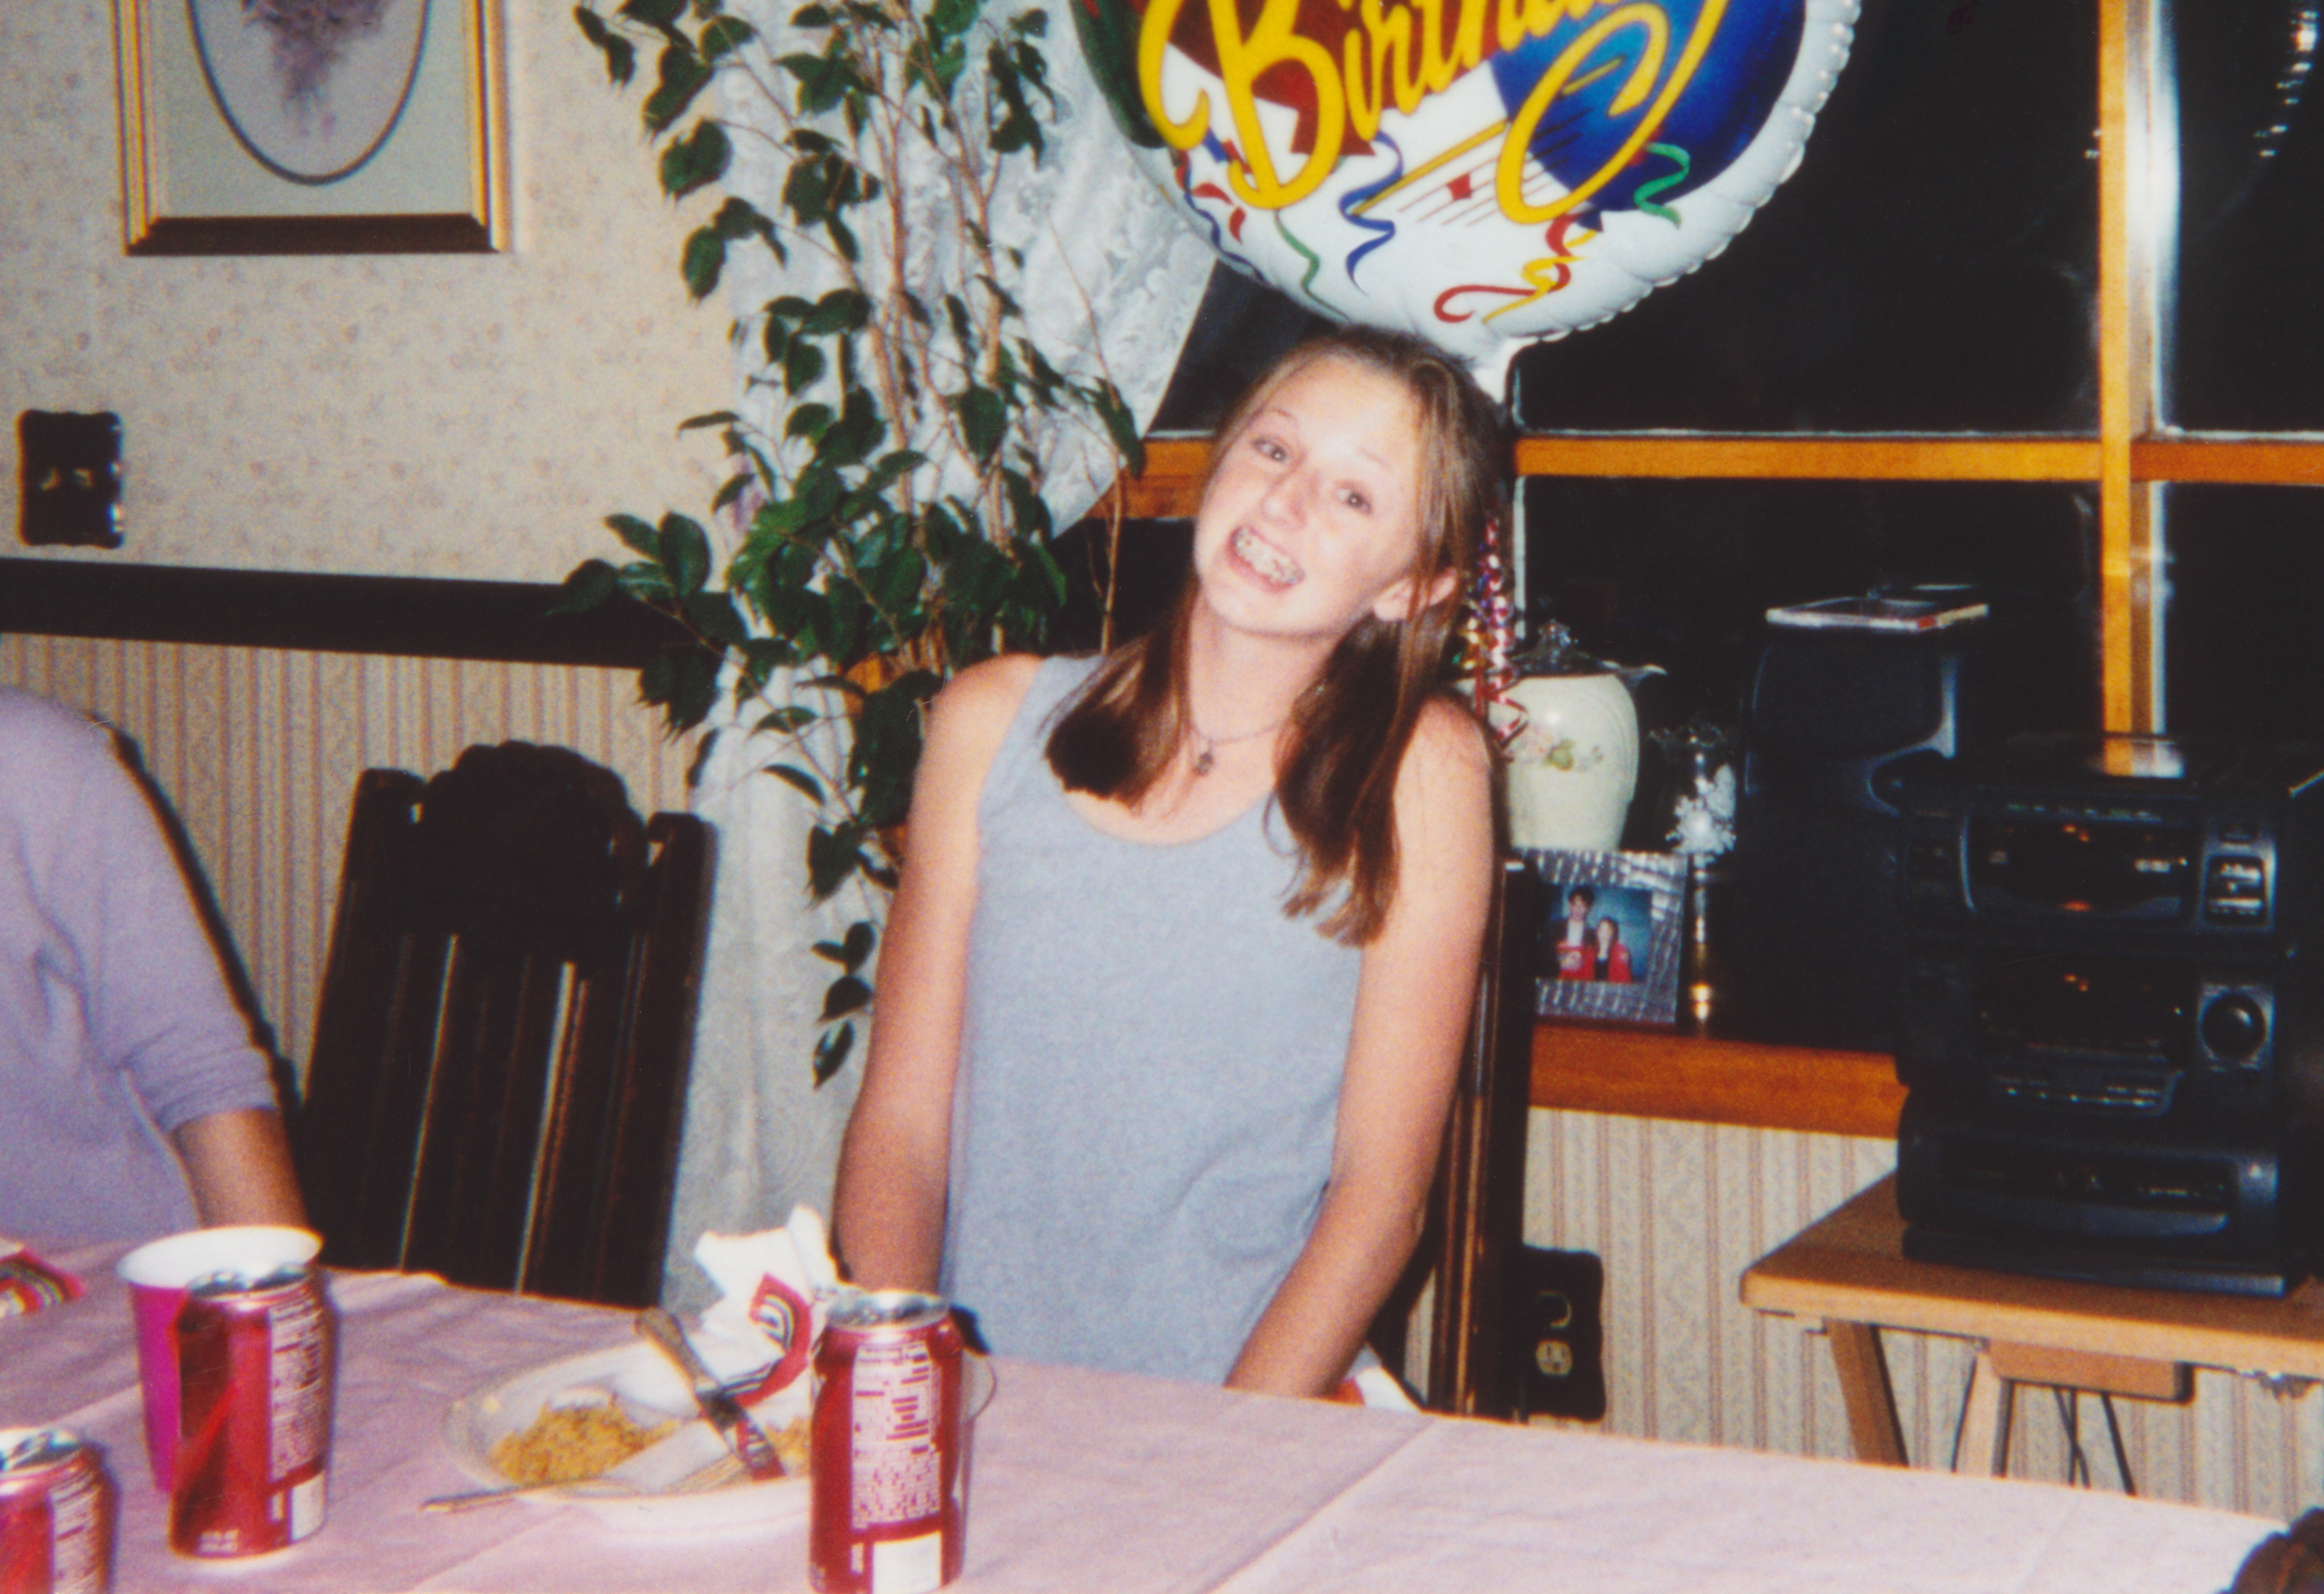 A young girl smiles at a dining table with a birthday balloon in the background. There are soda cans and a plate of food on the table